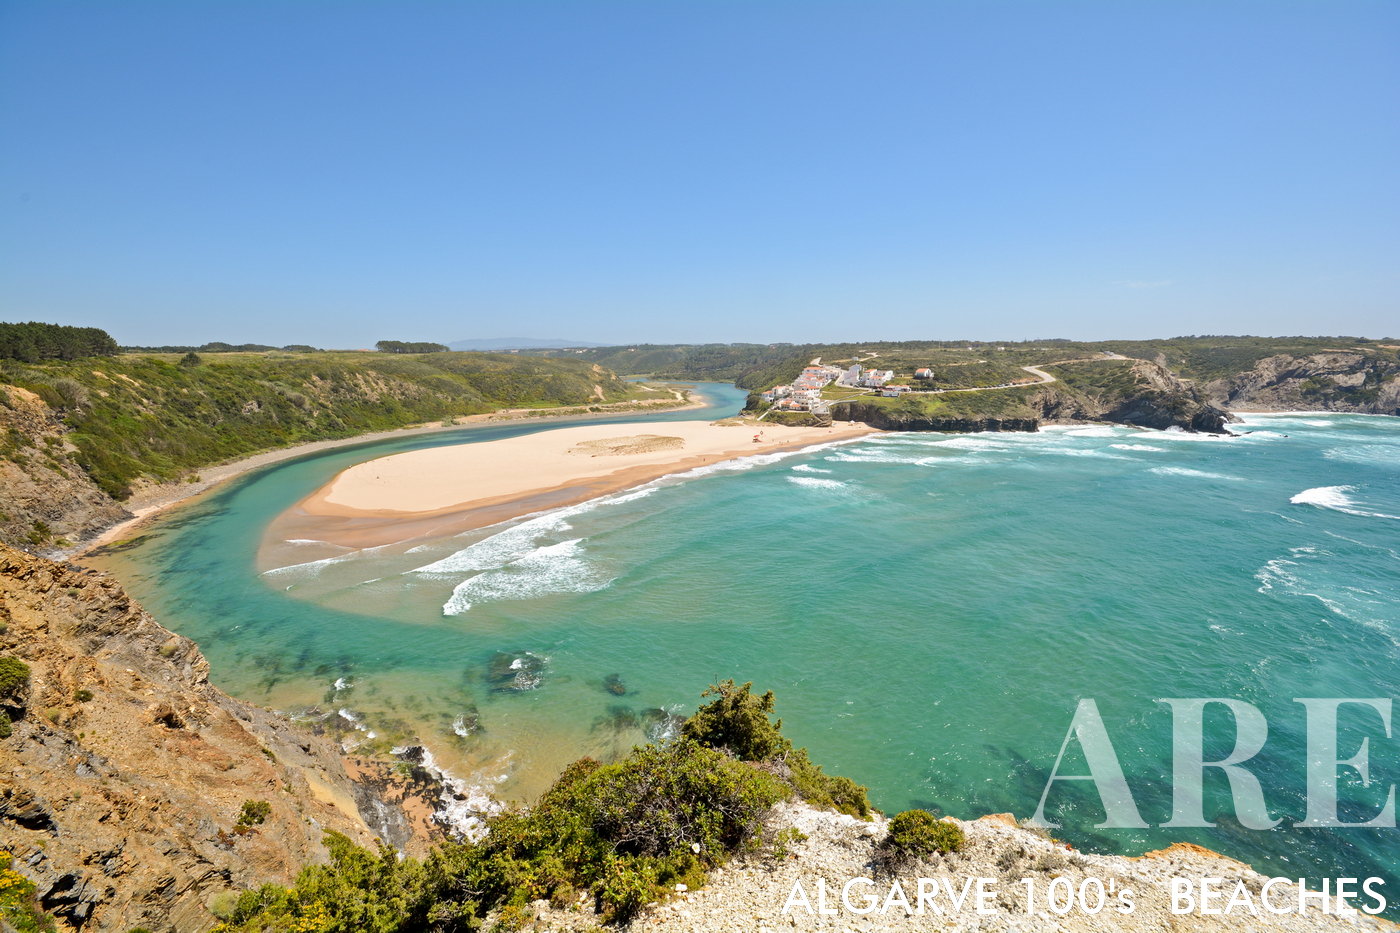 A panoramic view opens up to Odeceixe Beach, a surfer's paradise on the West coast of Algarve, in the Aljezur District of Portugal. A sandy bank, shaped by the river, graces the scene, while the river meets the ocean on the right side of the beach. On the left, a small village of quaint houses perches on the cliff top, overlooking the scenic coastal vista.